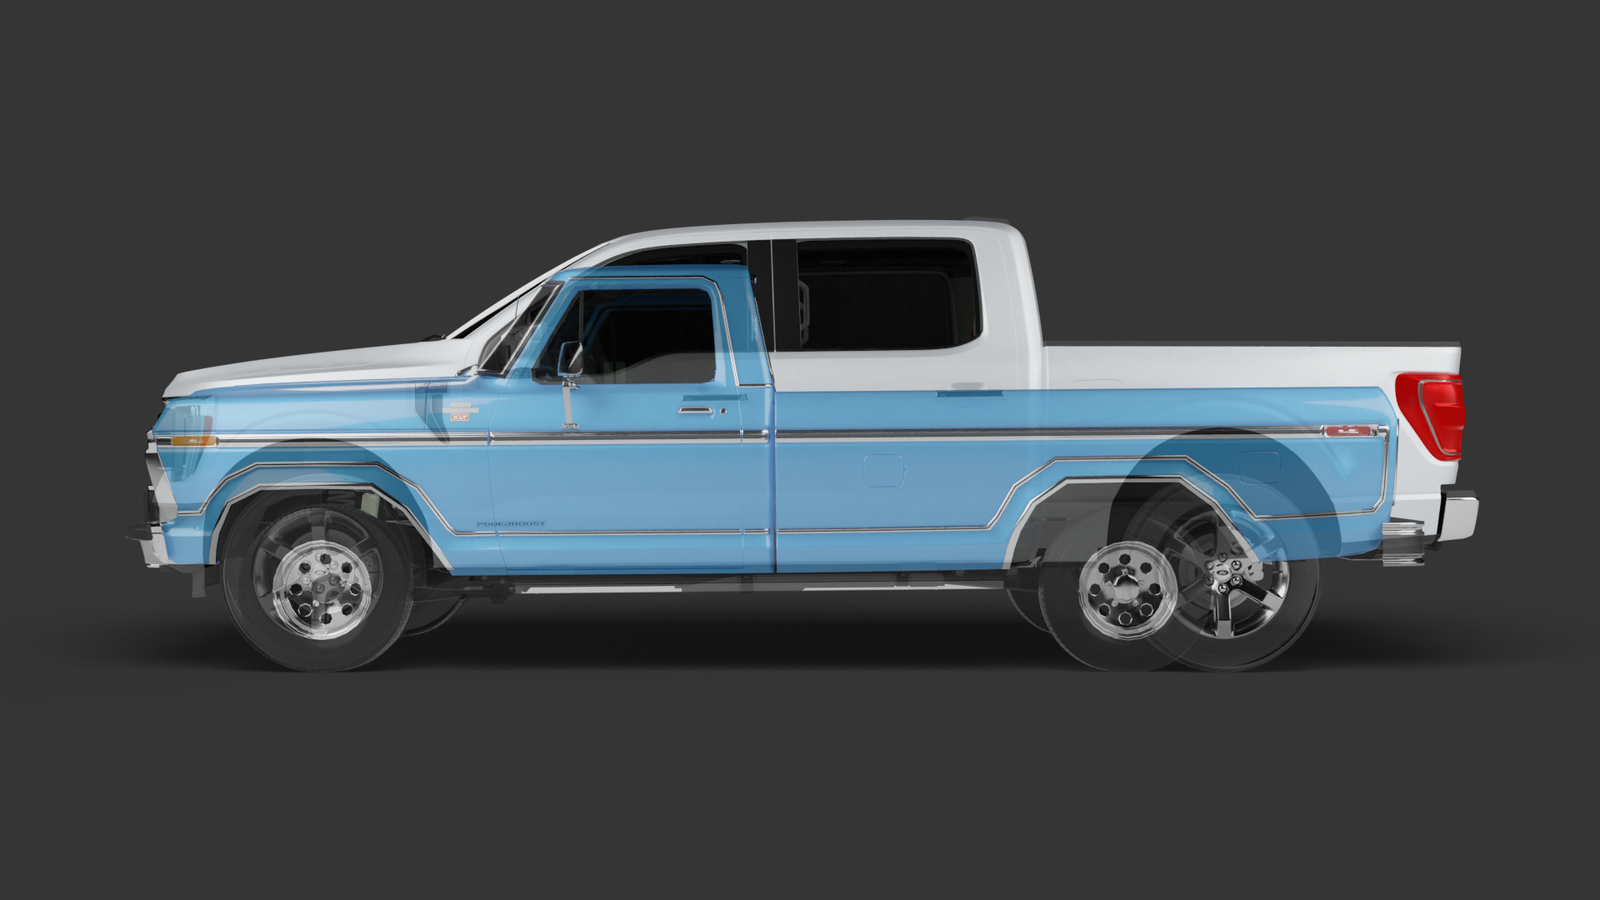 How pickup trucks got so big Size, weight and safety